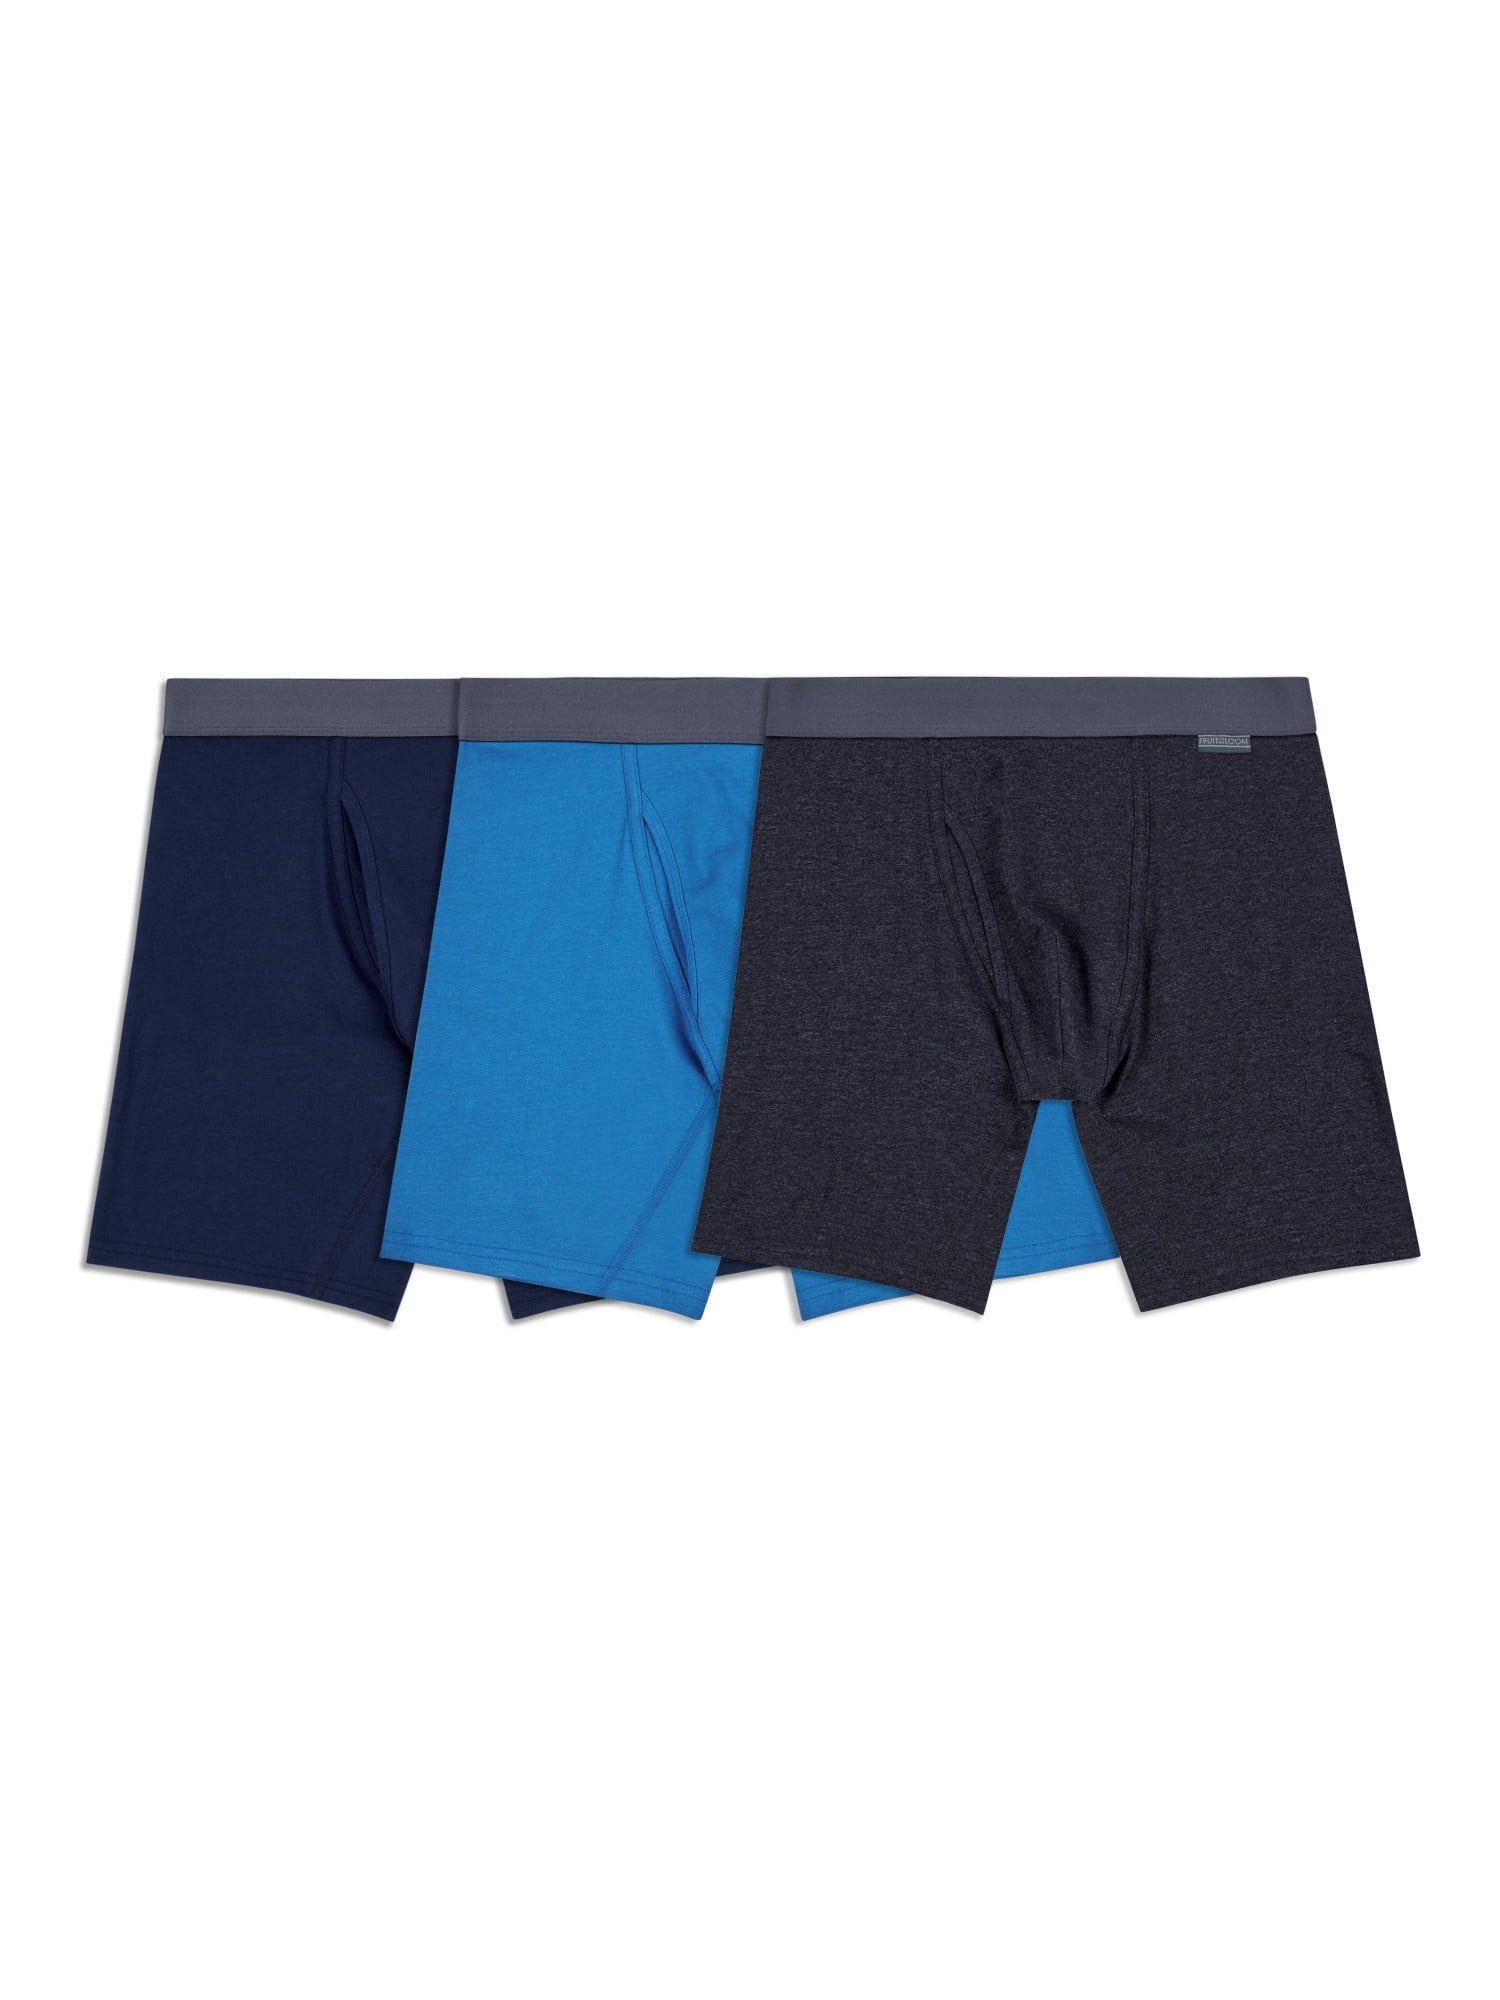 Fruit of the Loom Men's Crafted Comfort Long Leg Boxer Briefs, 3 Pack 